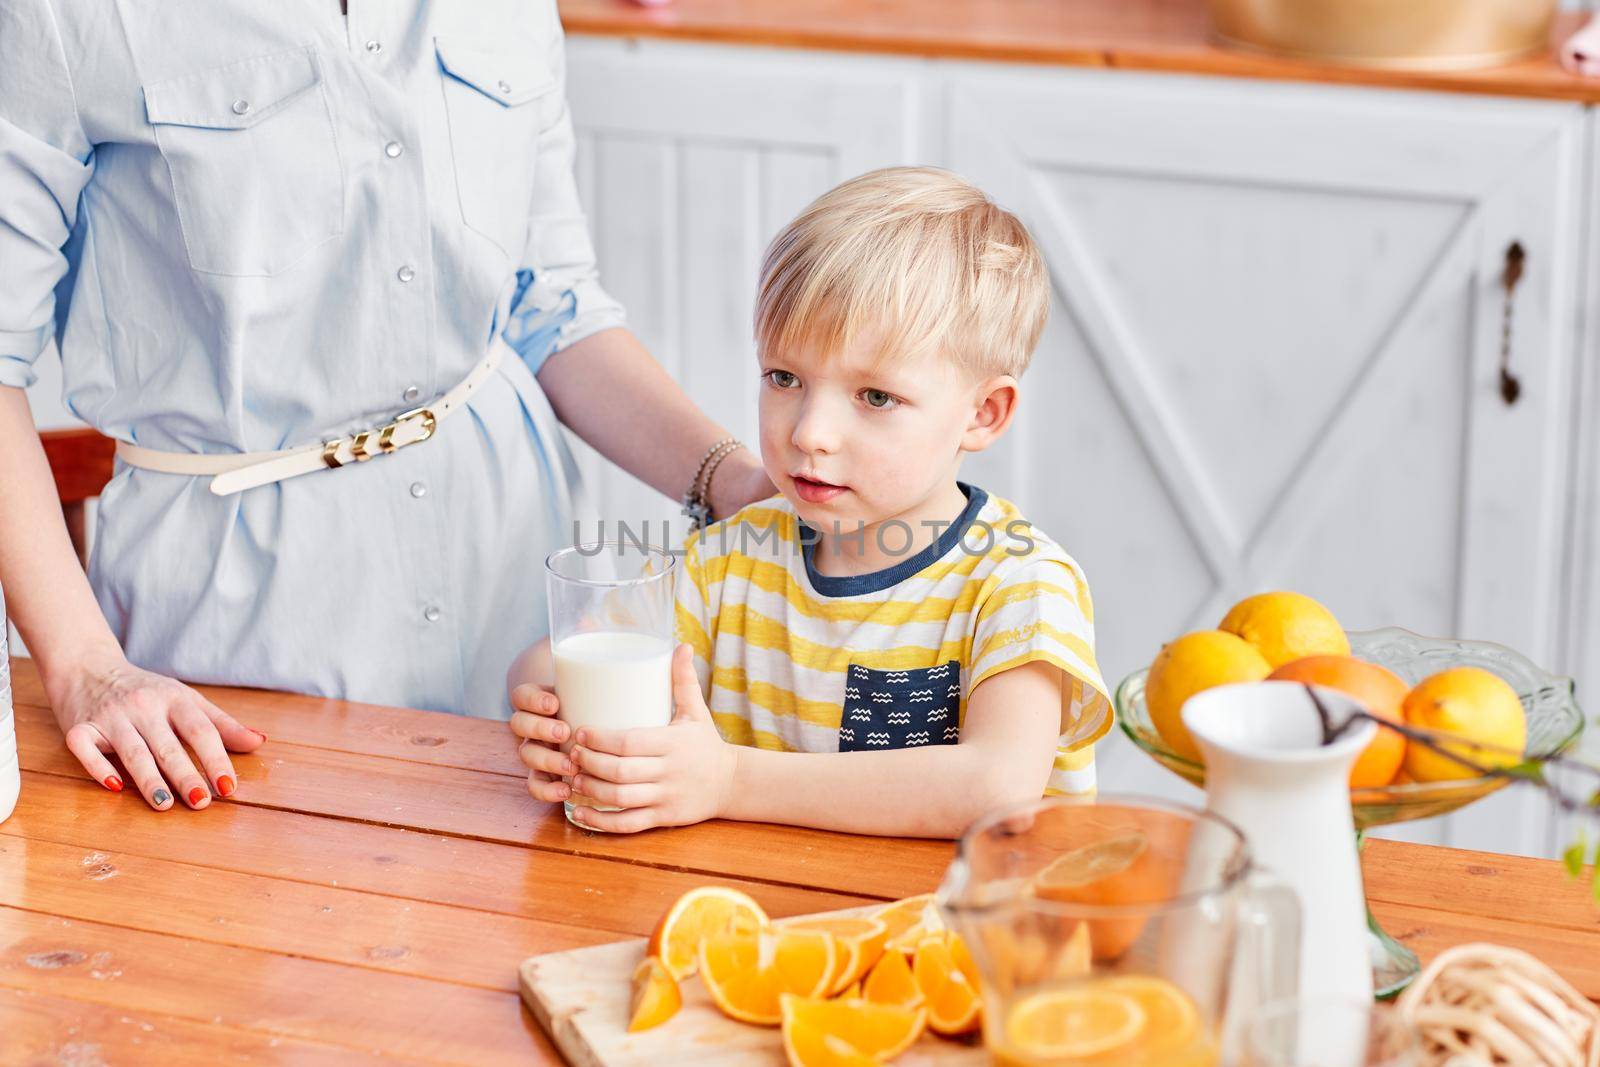 The boy drinks milk from a glass. Mother and son are smiling while having a breakfast in kitchen. Mom is pouring milk into glass by Malkovkosta